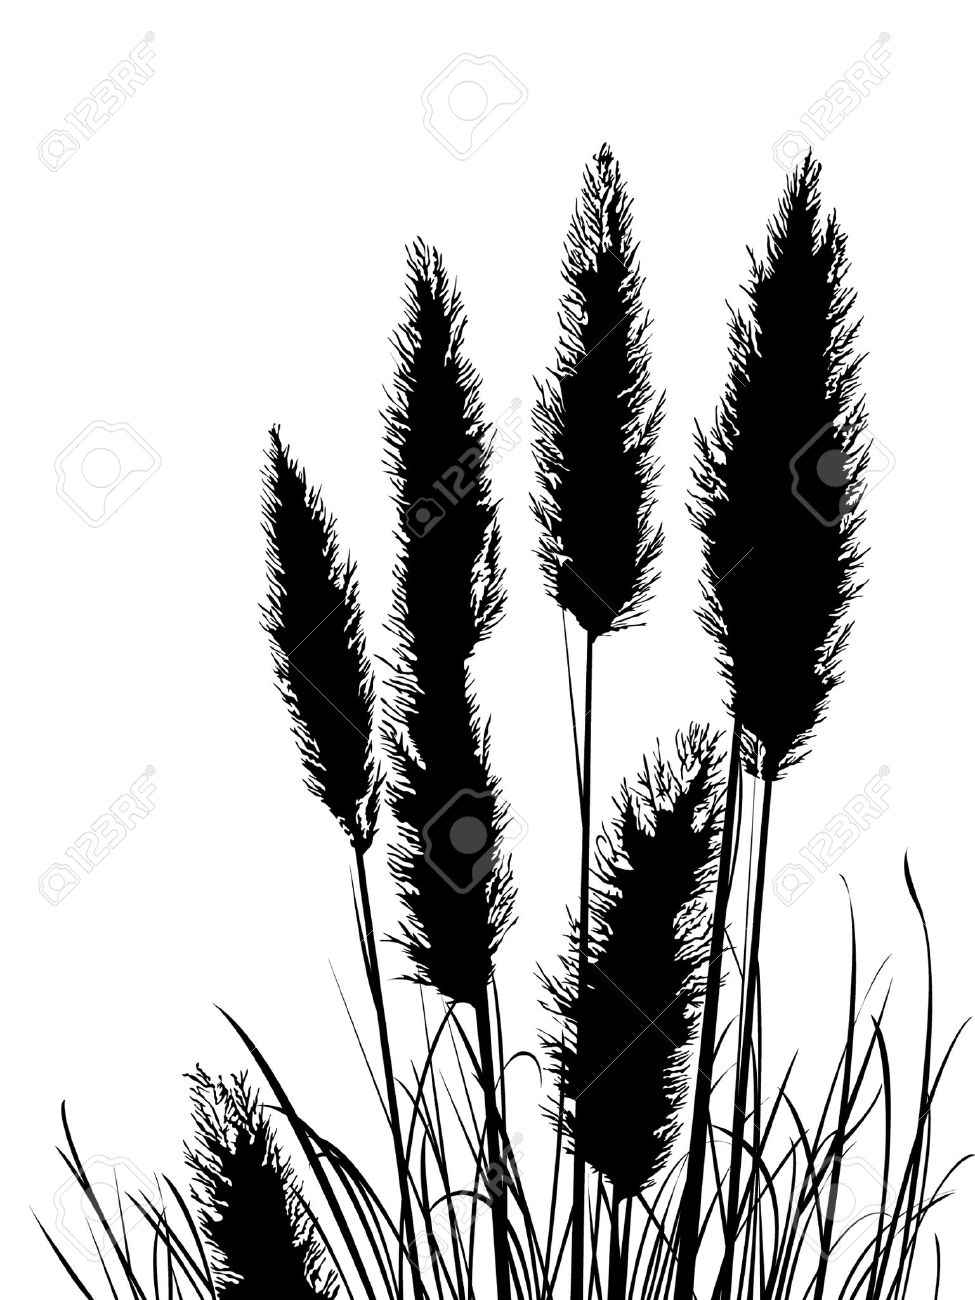 Pampas Grass clipart #13, Download drawings